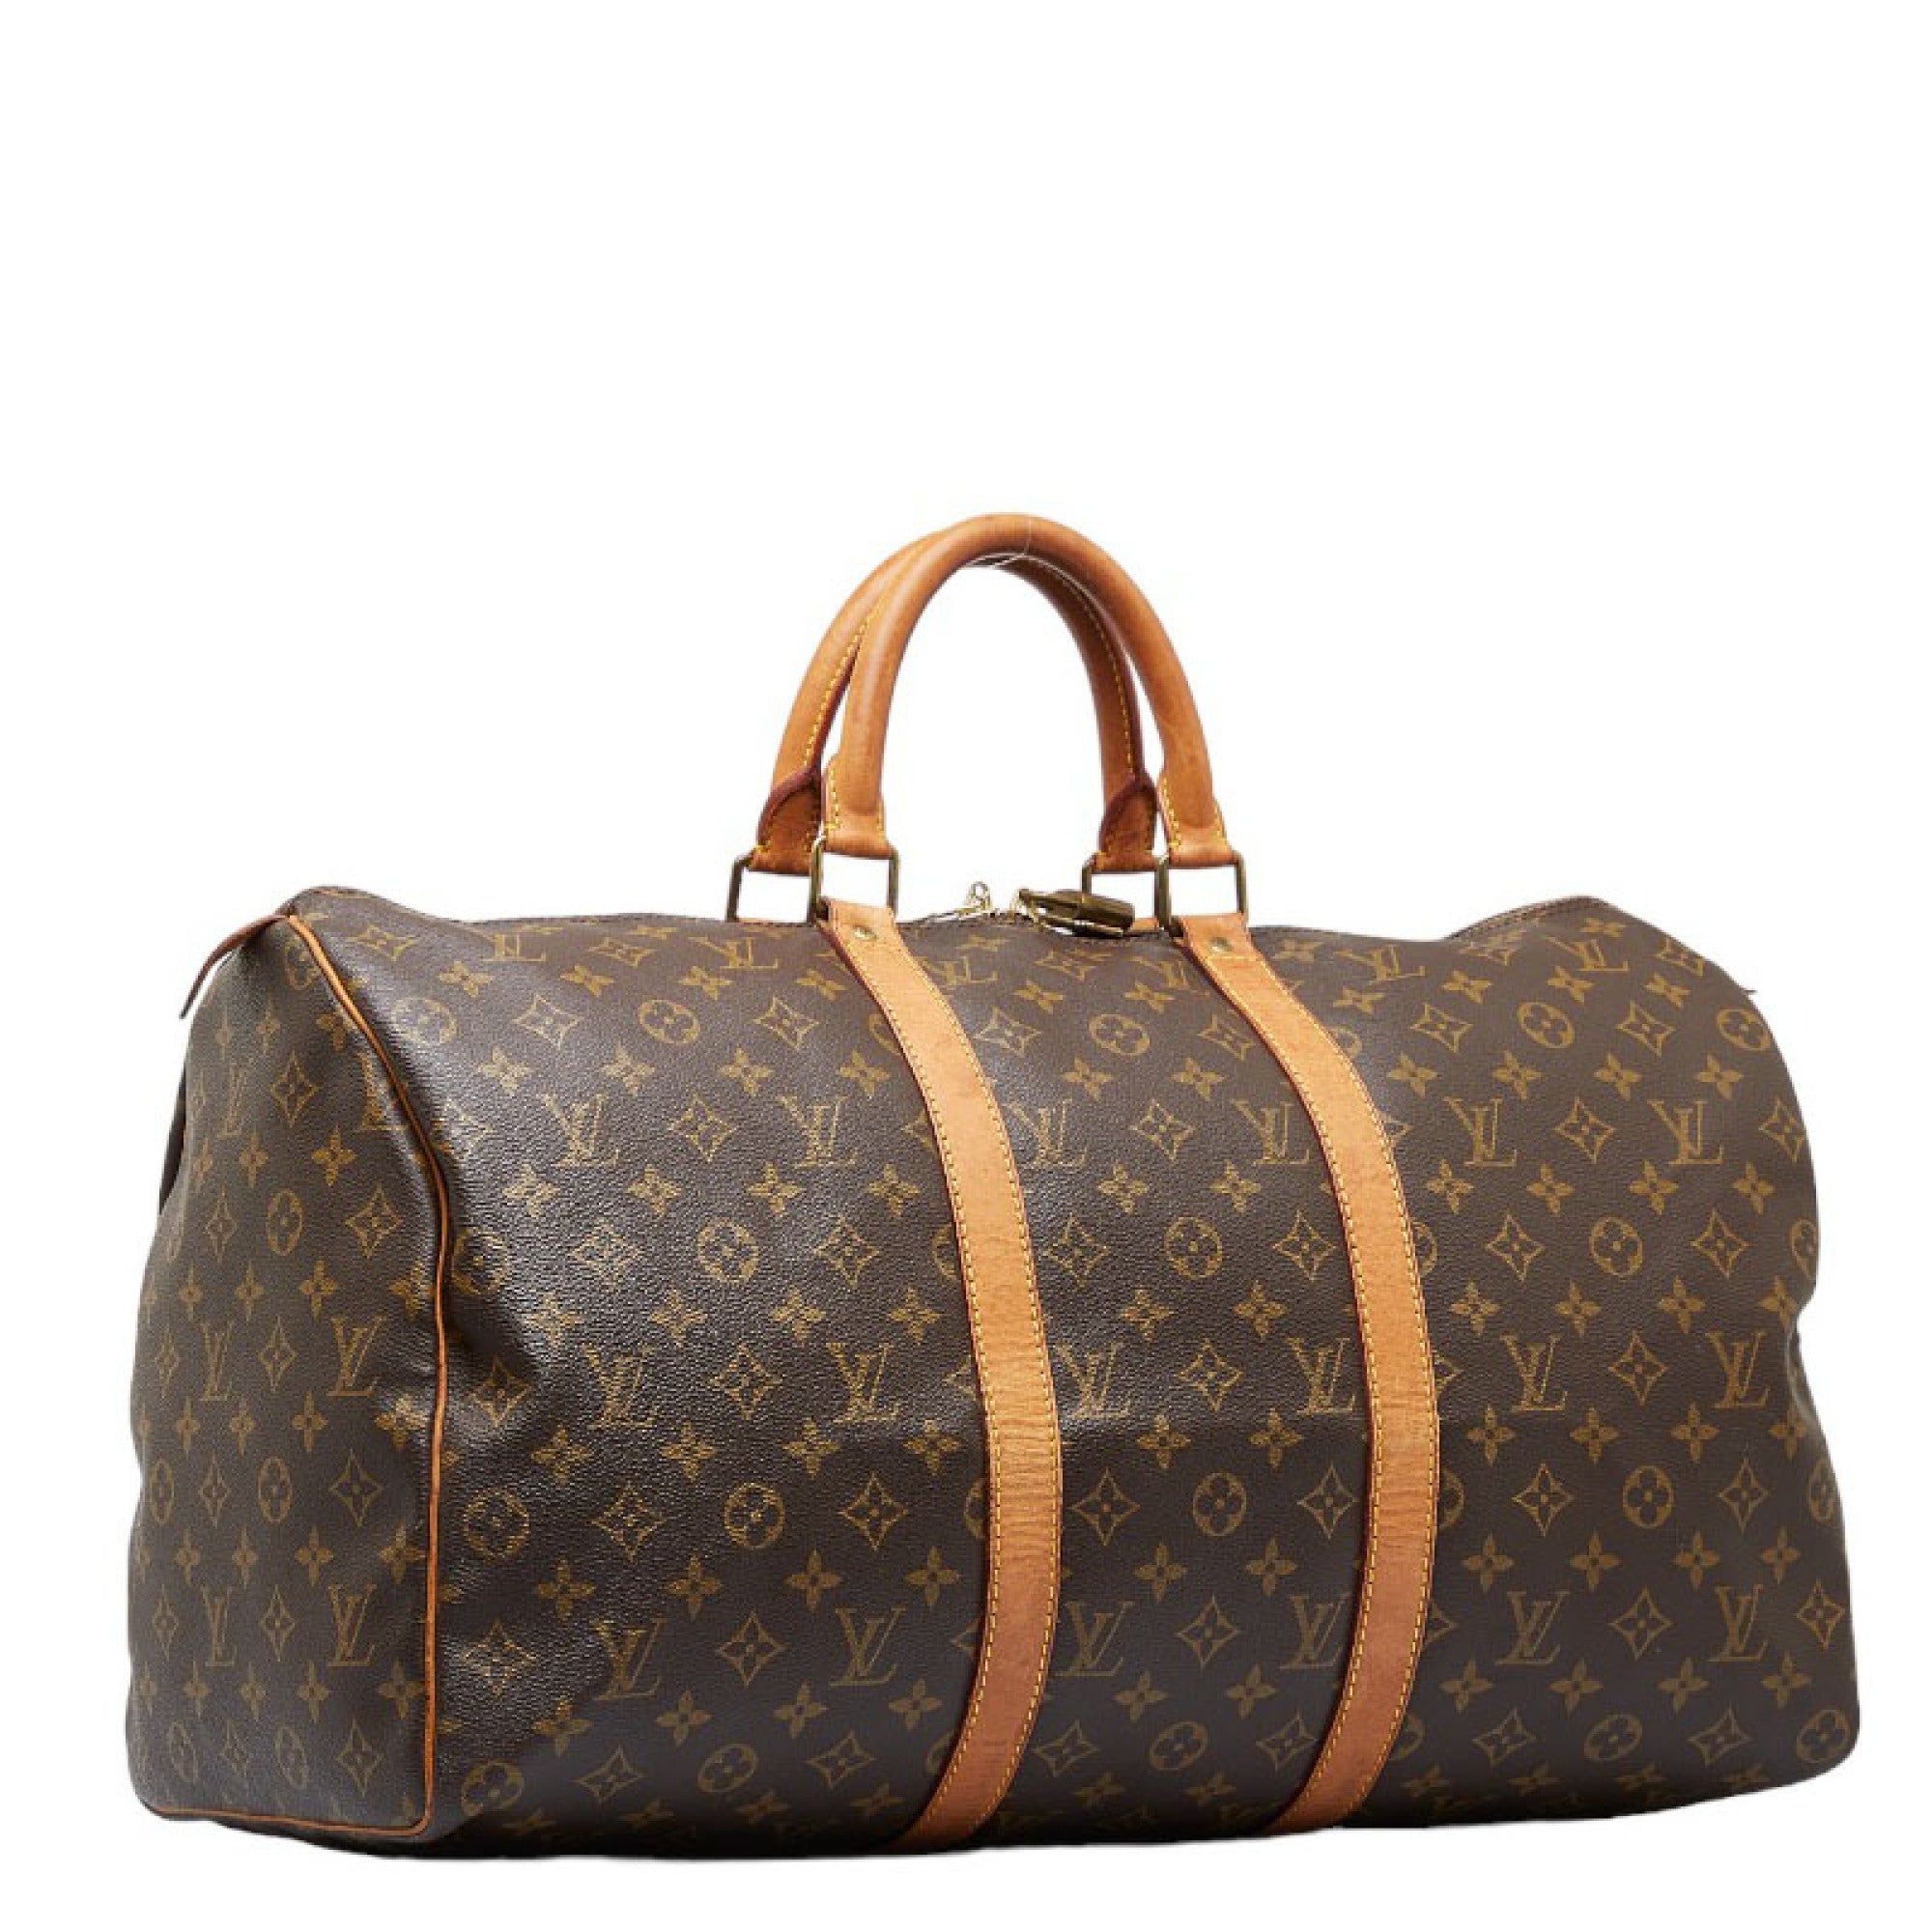 Keepall 60 Bandouliere, Used & Preloved Louis Vuitton Travel Bag, LXR USA, Brown